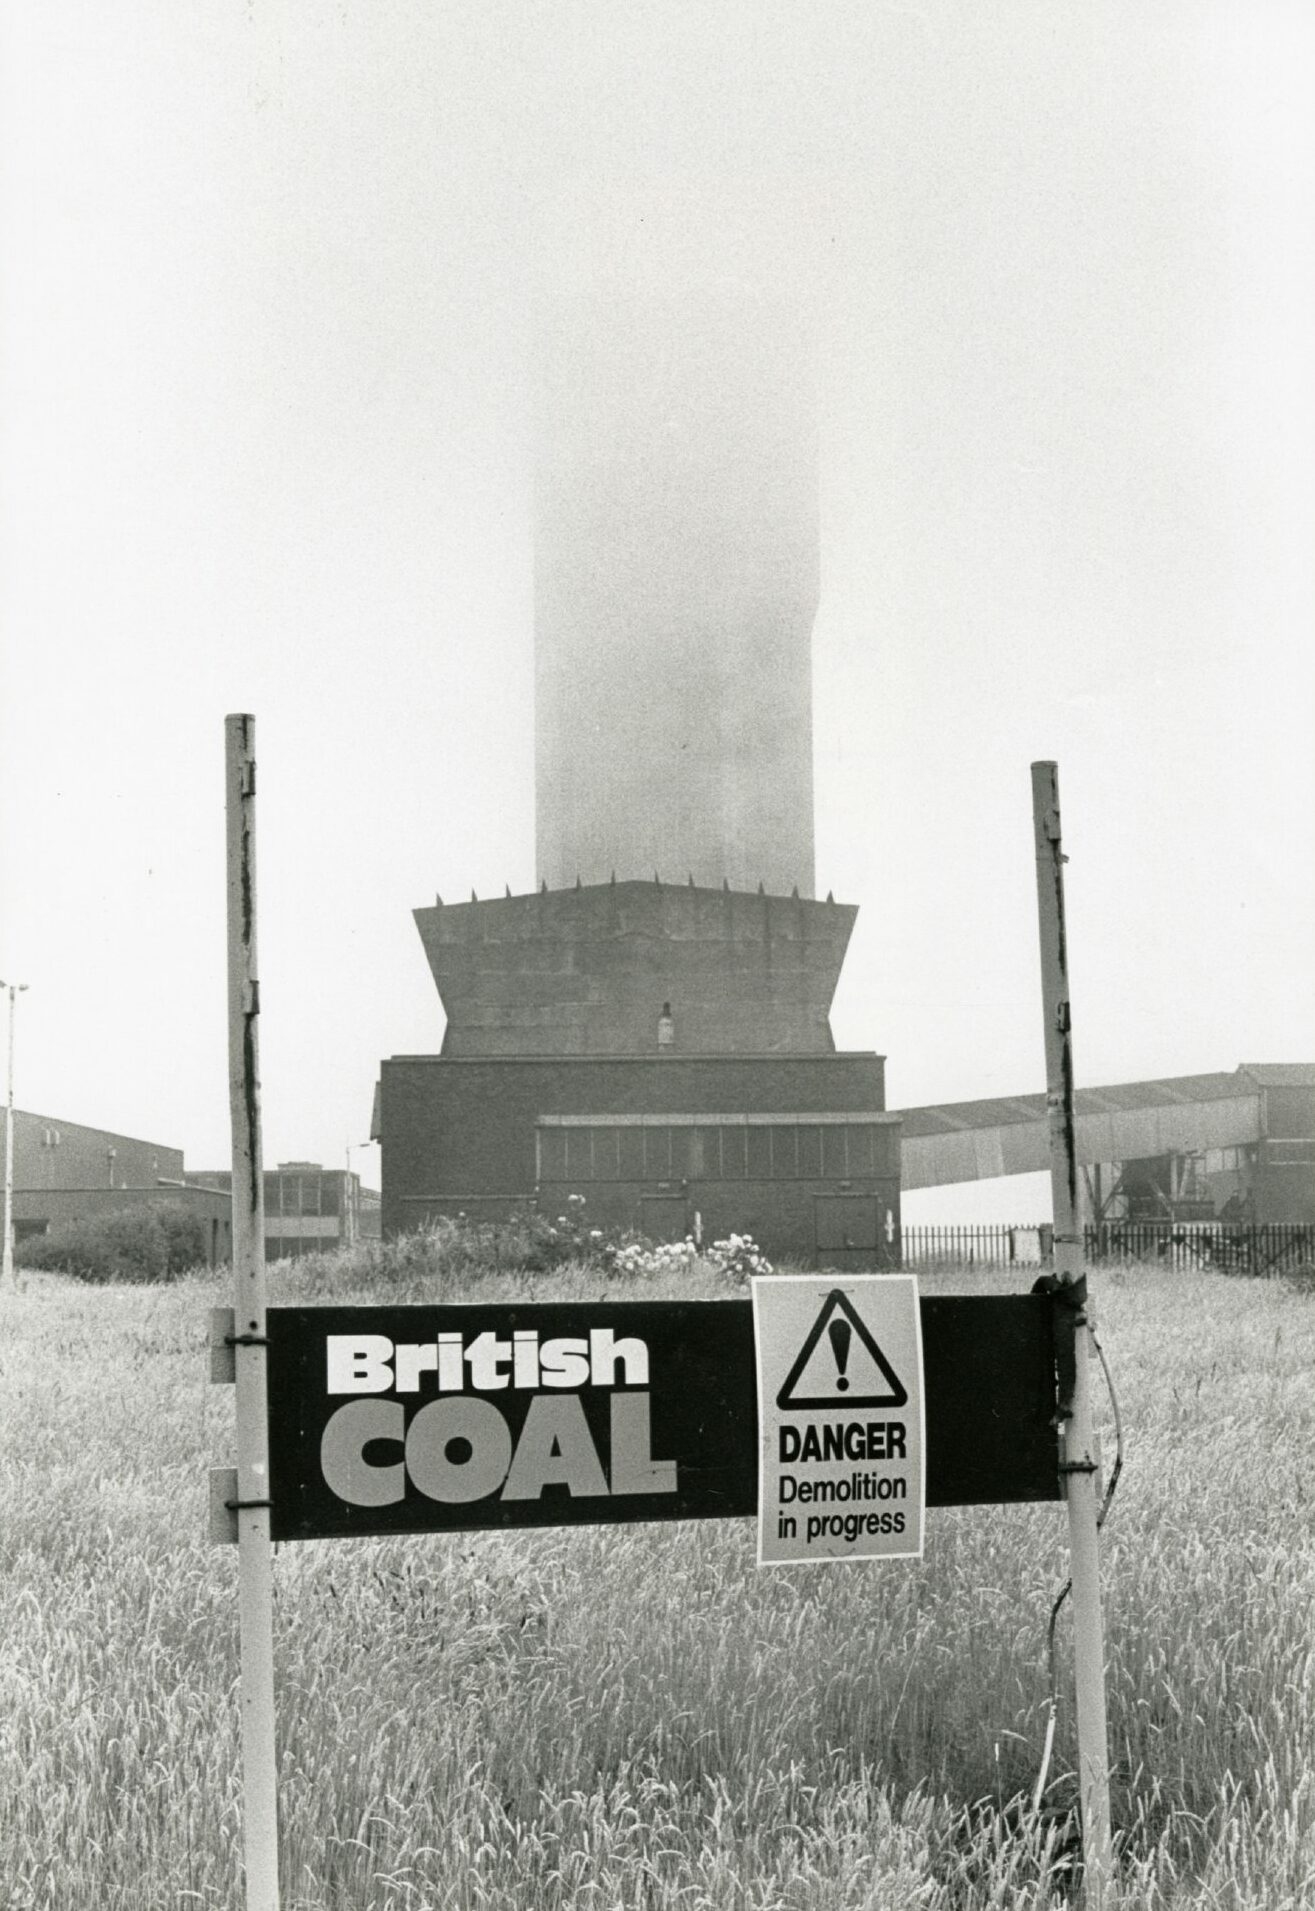 A sign indicating demolition work at Seafield Colliery, visible in the background.